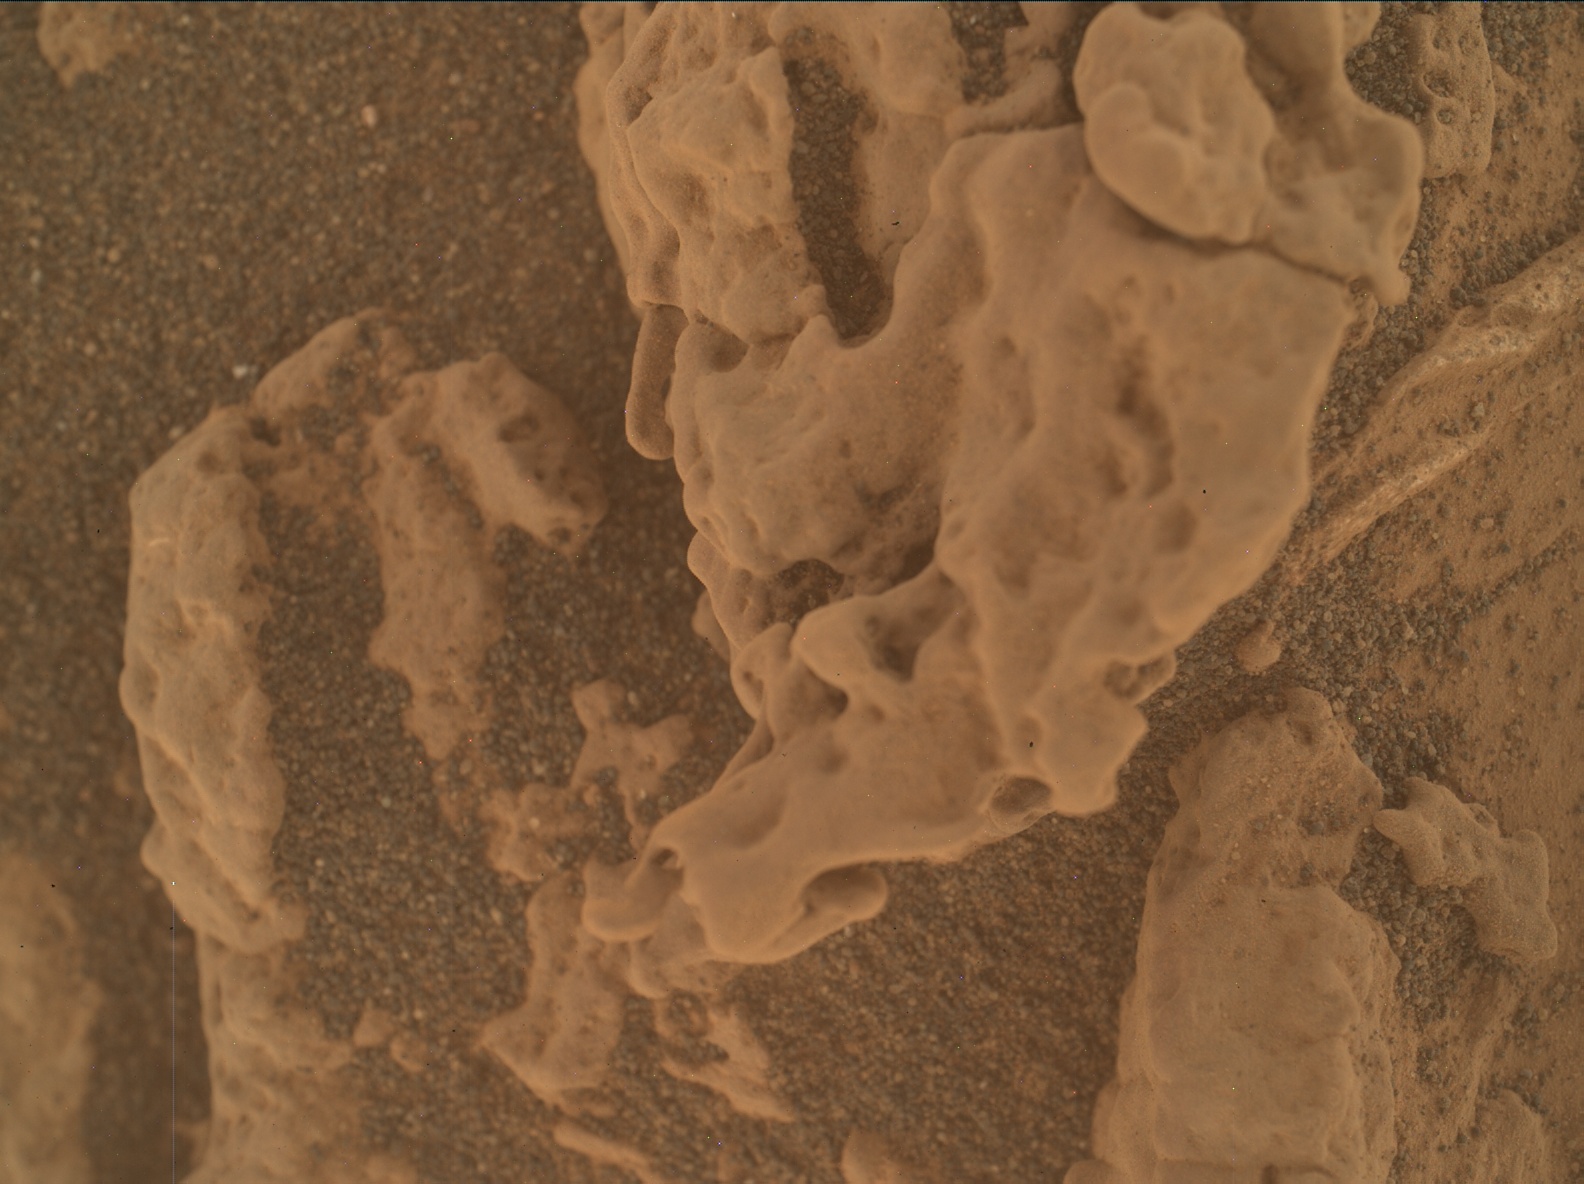 Nasa's Mars rover Curiosity acquired this image using its Mars Hand Lens Imager (MAHLI) on Sol 3185